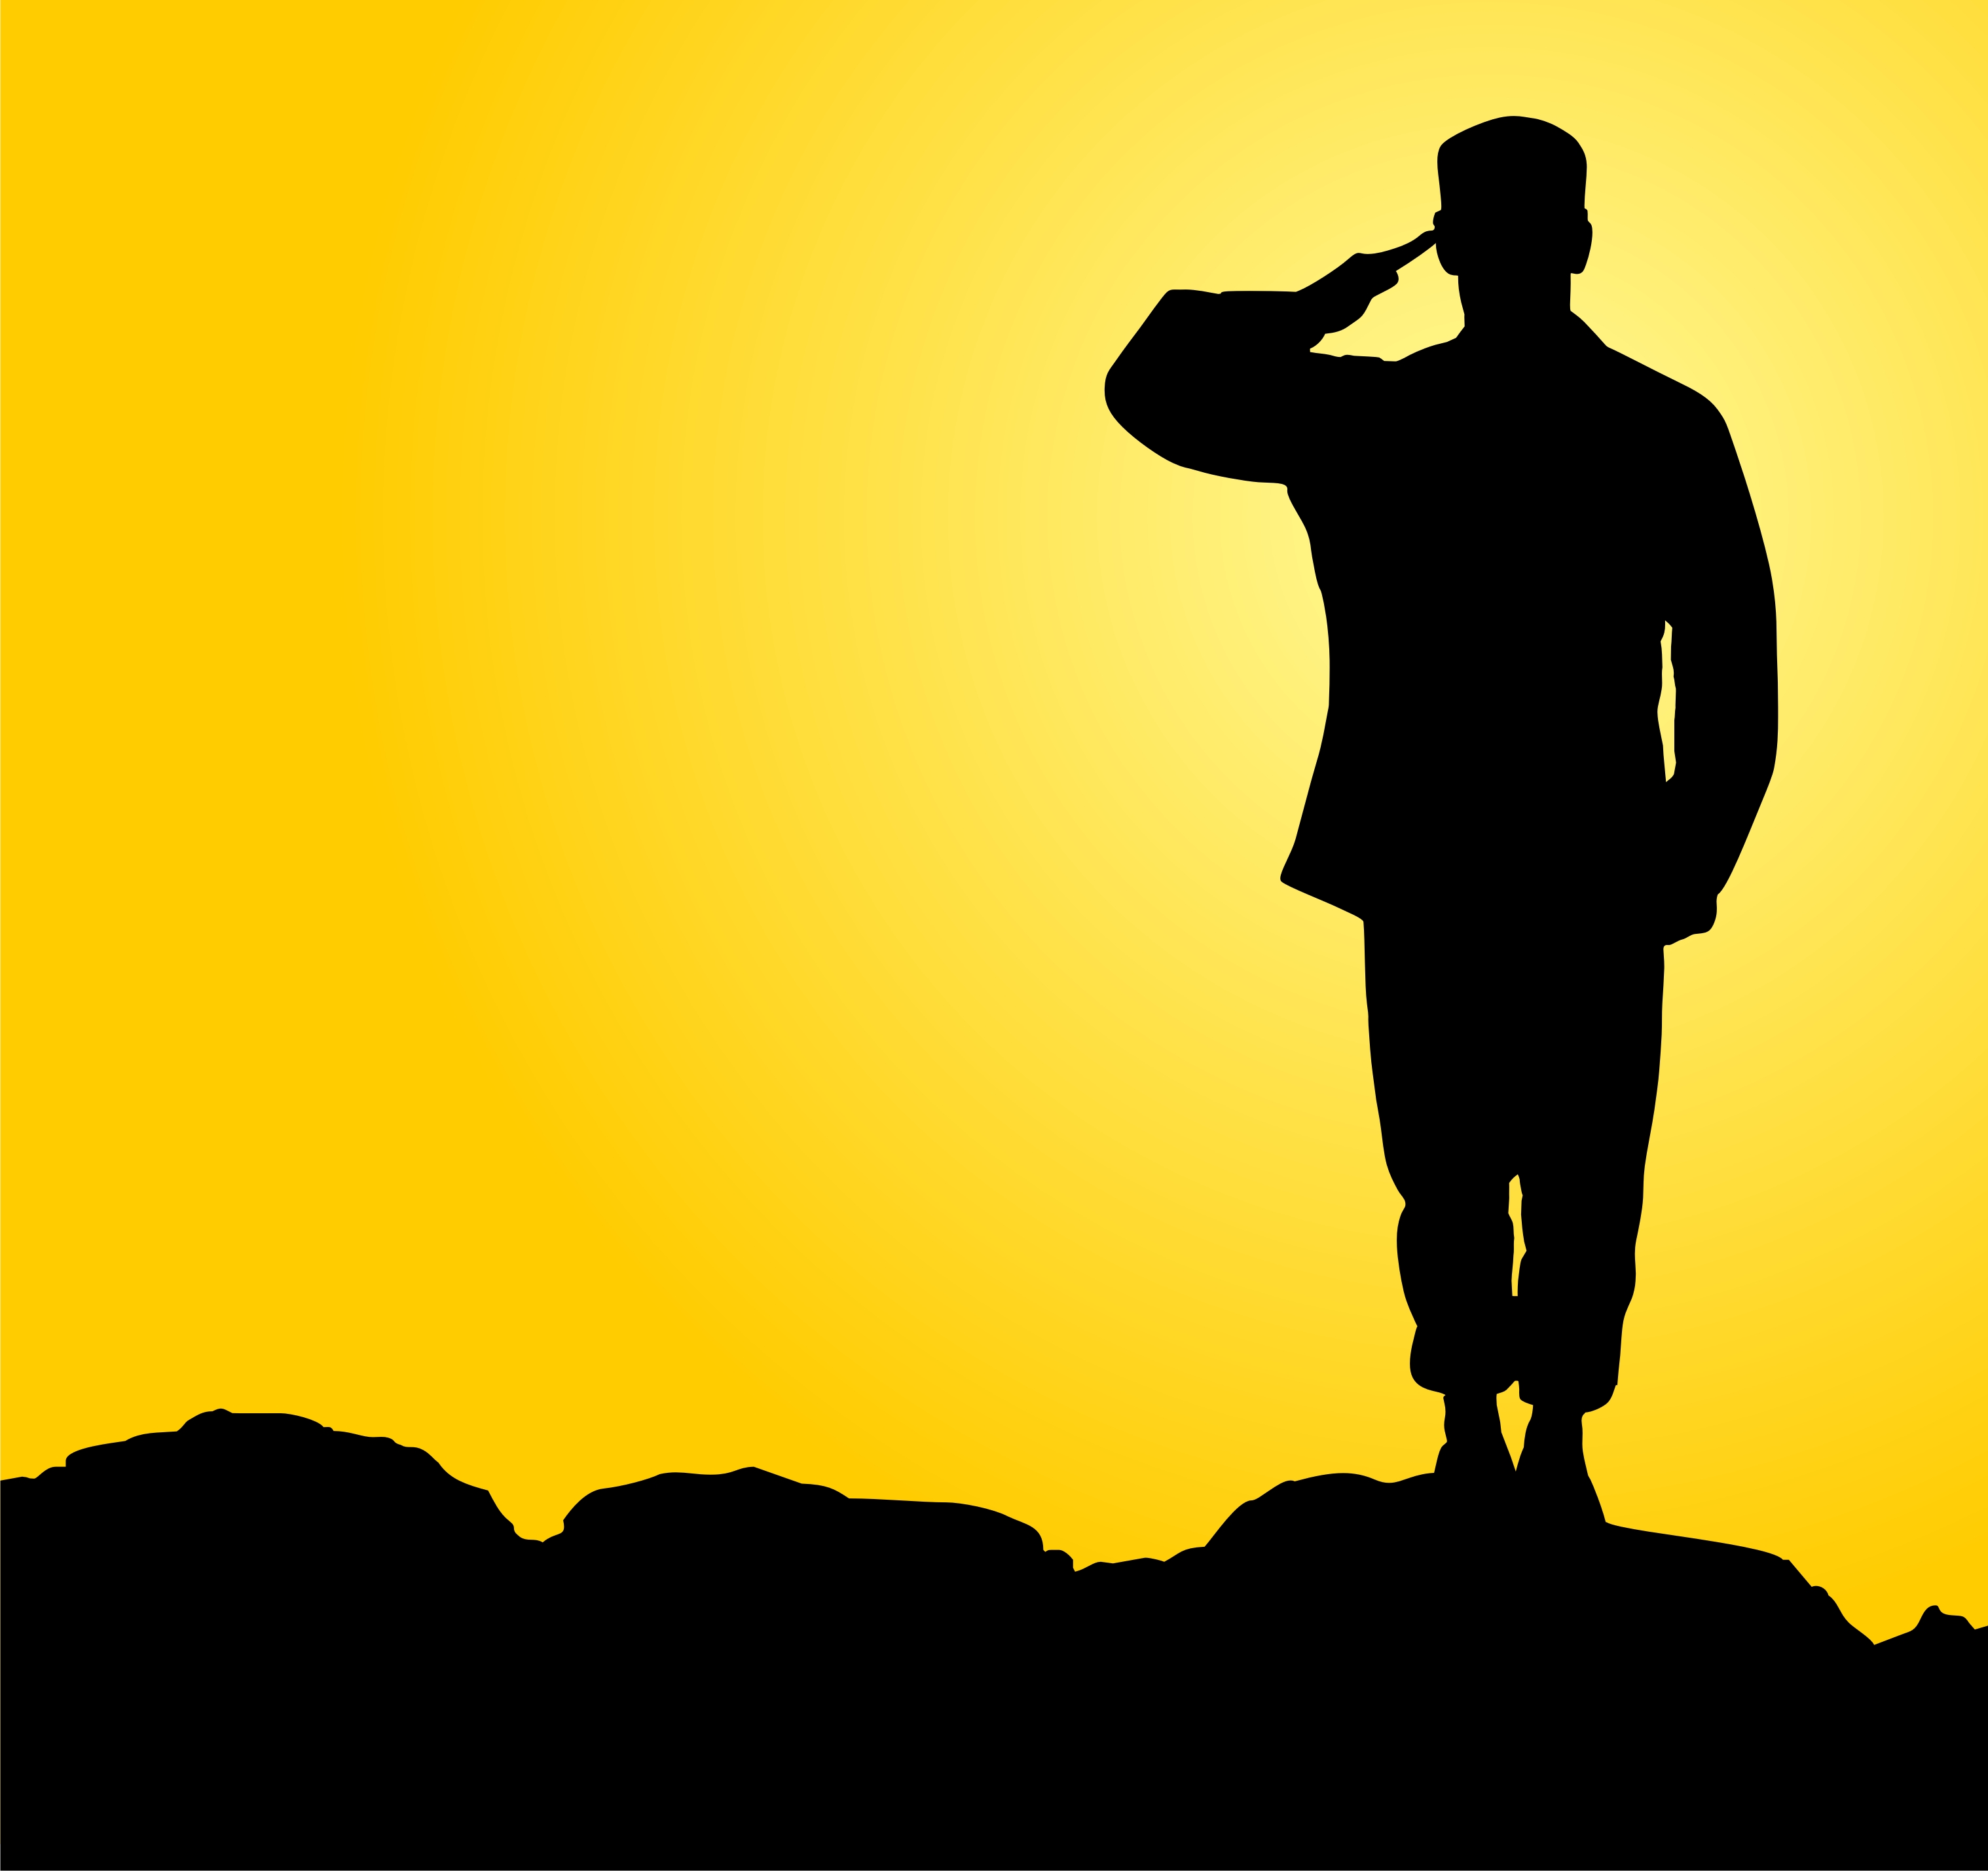 indian soldier salute clipart